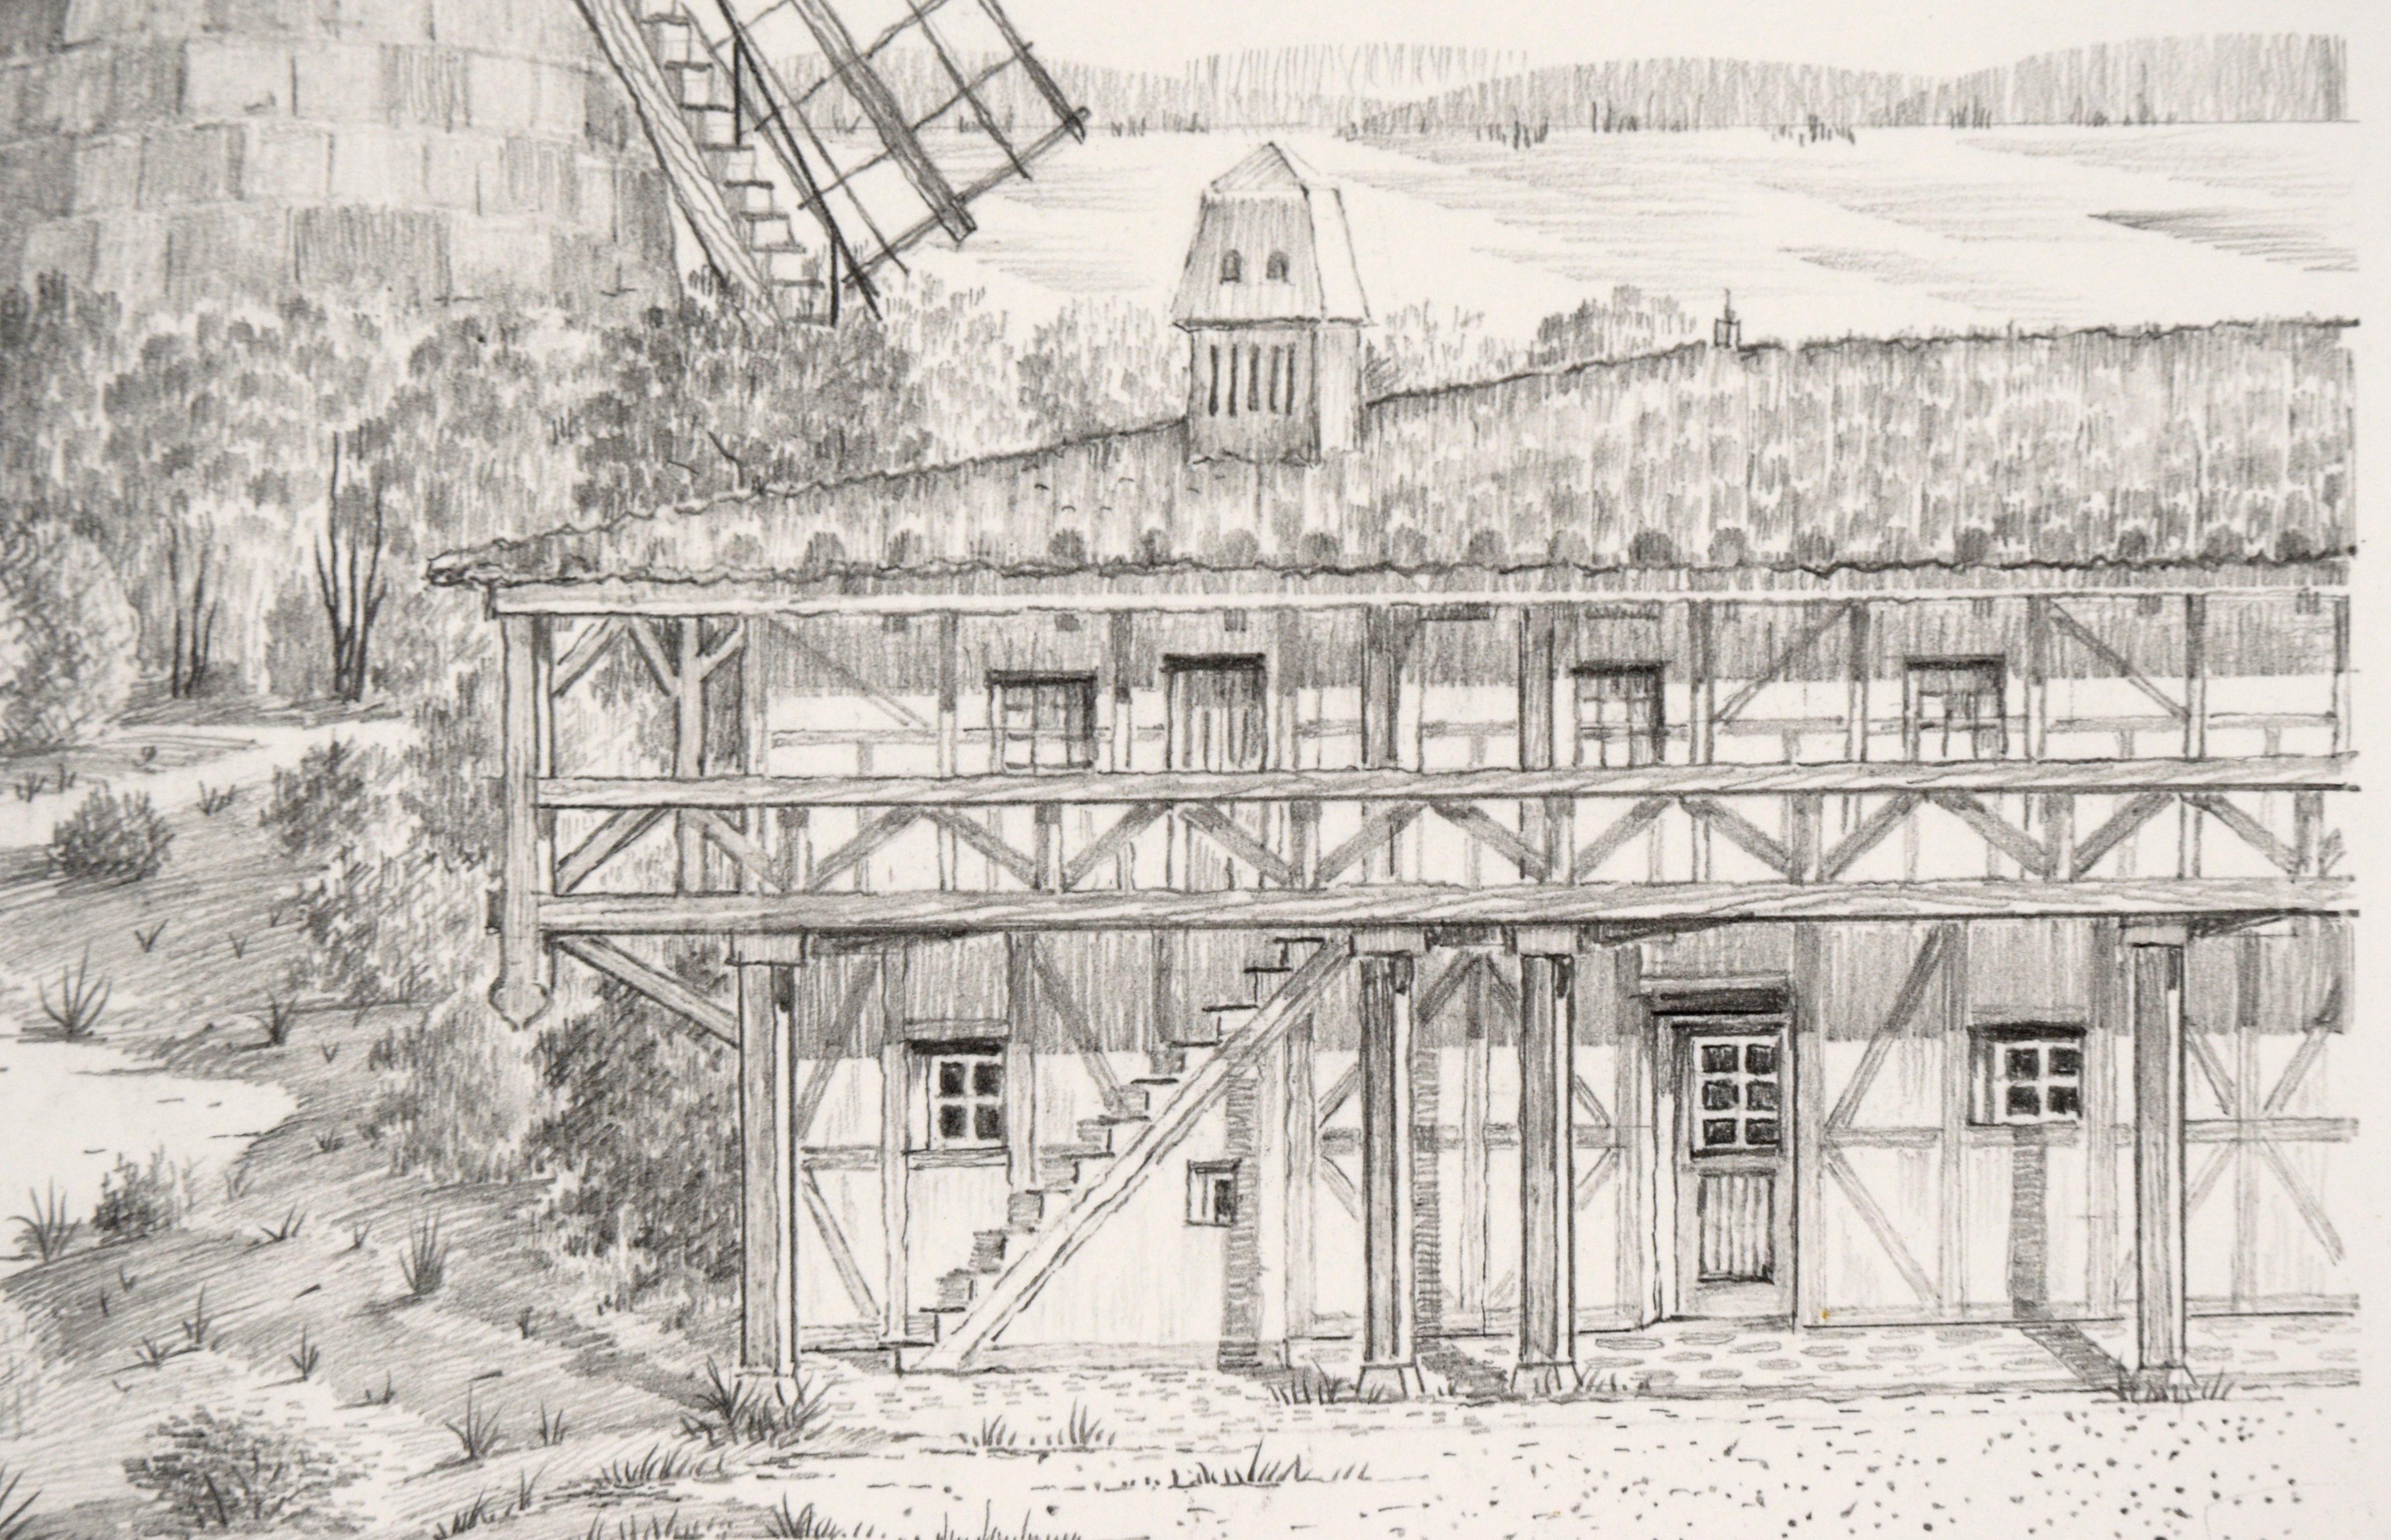 Highly detailed drawing of a windmill on a farm in Denmark by M. Mayer (20th Century). A large rustic windmill is the central focus of the piece, towering above the nearby trees and buildings. The landscape and buildings are rendered in exquisite